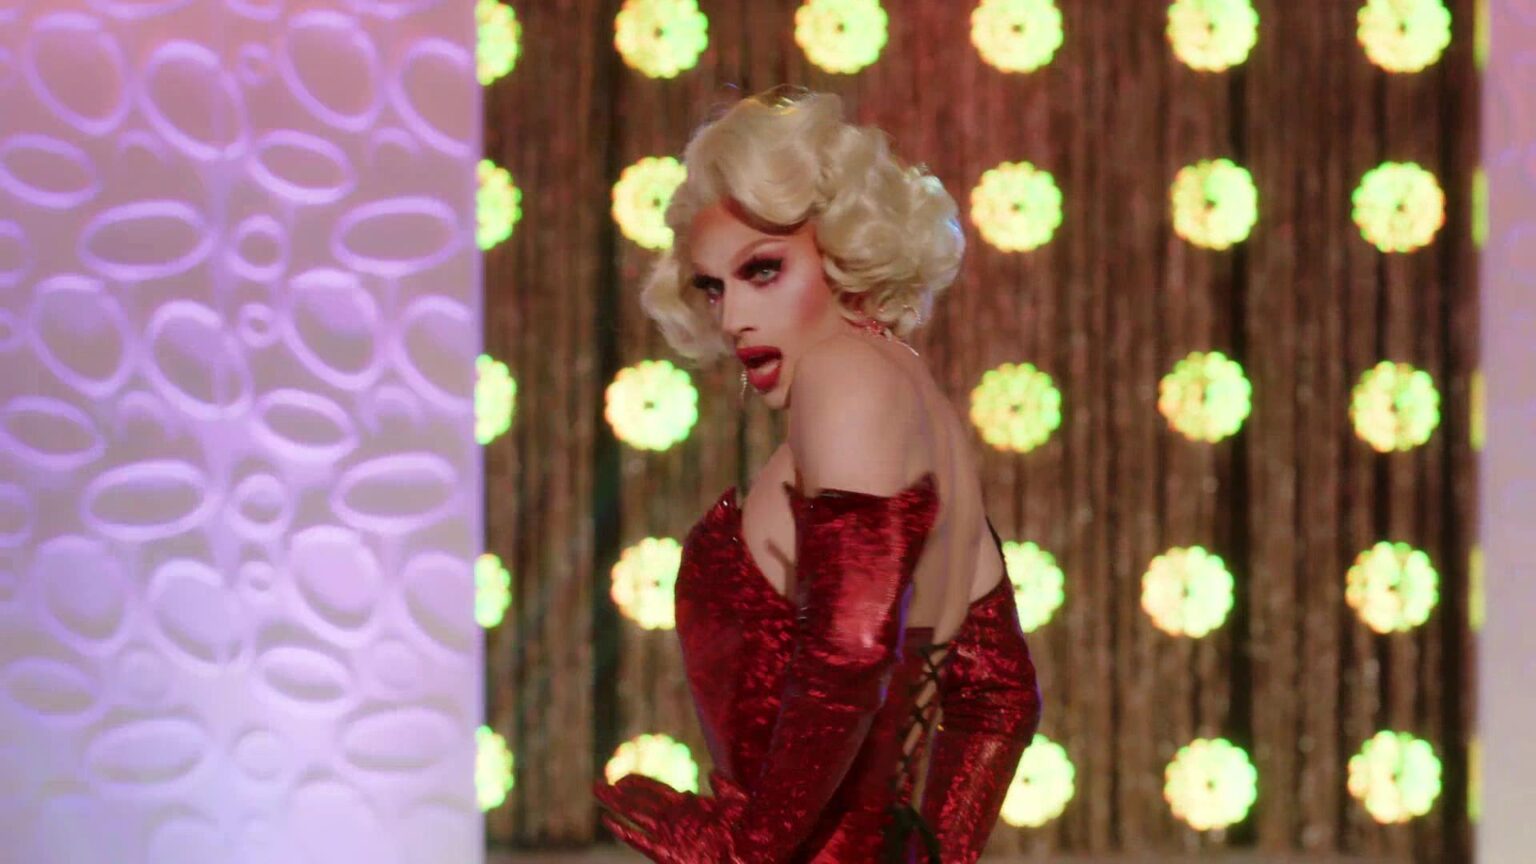 Scarlet Adams kept bringing her game week after week and grew to be the queen to beat over season one of 'Drag Race Down Under'. Get the tea on her growth.